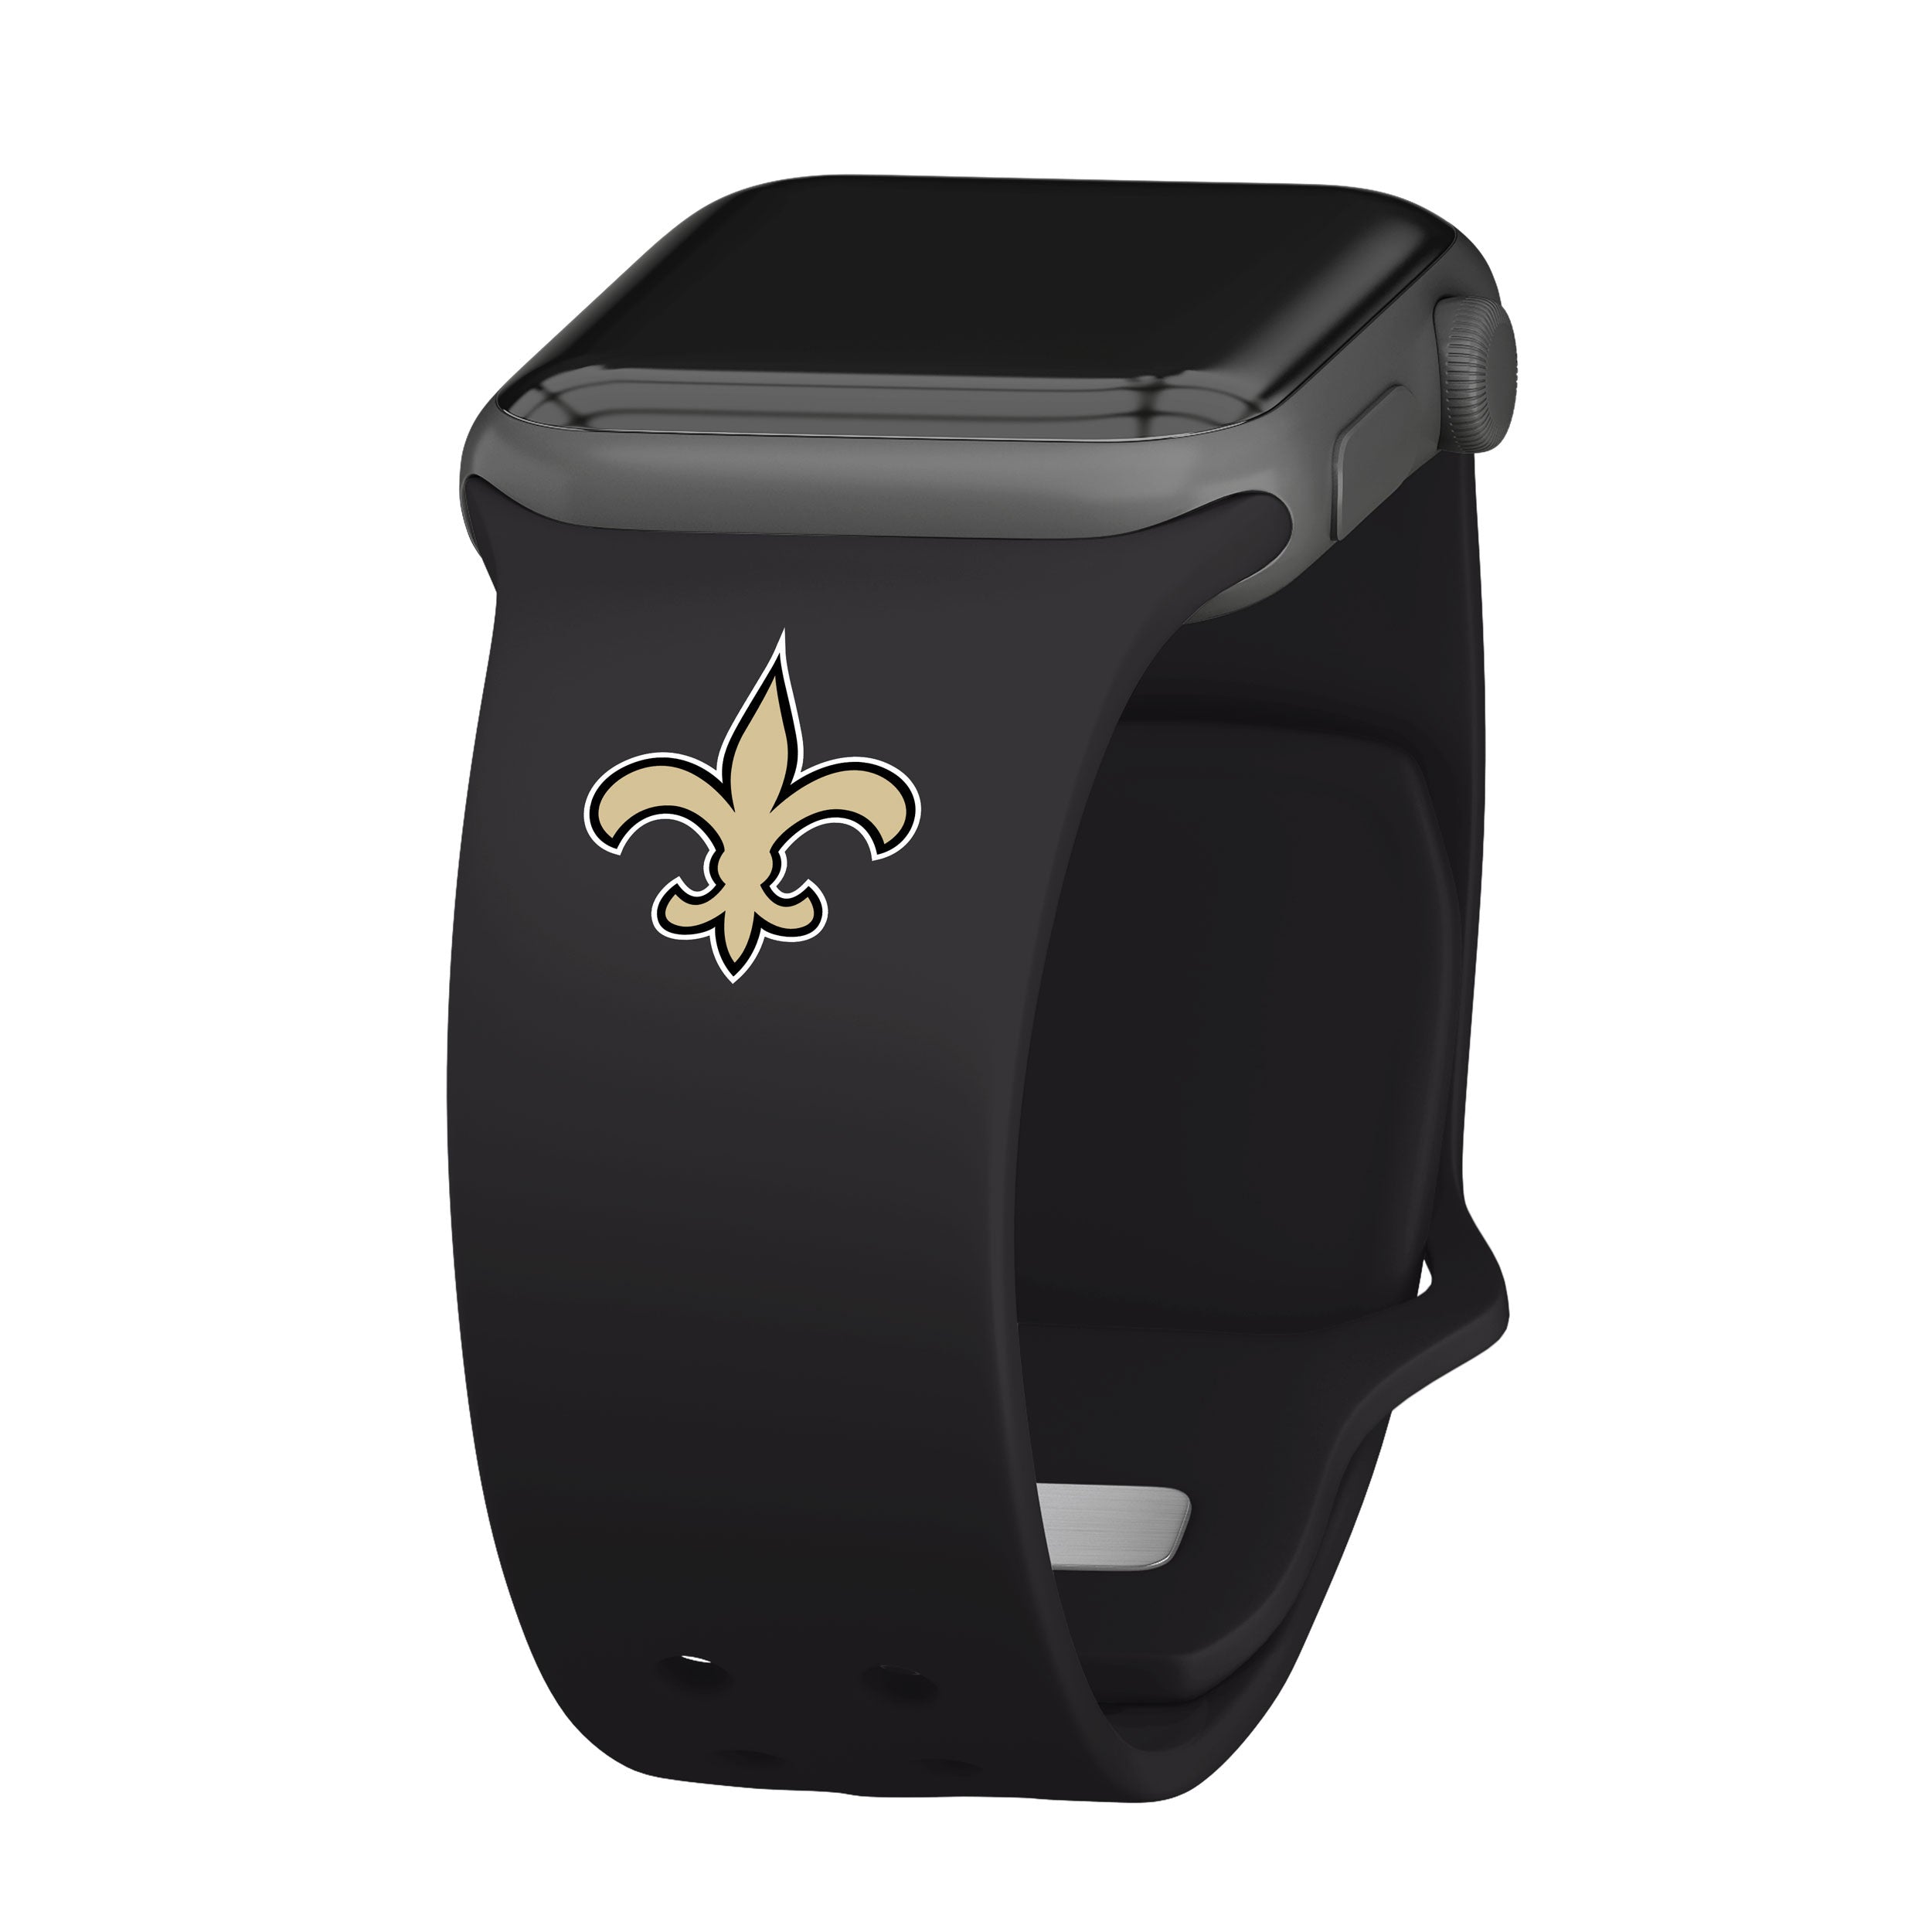 Black New Orleans Saints Silicone Apple Watch Band